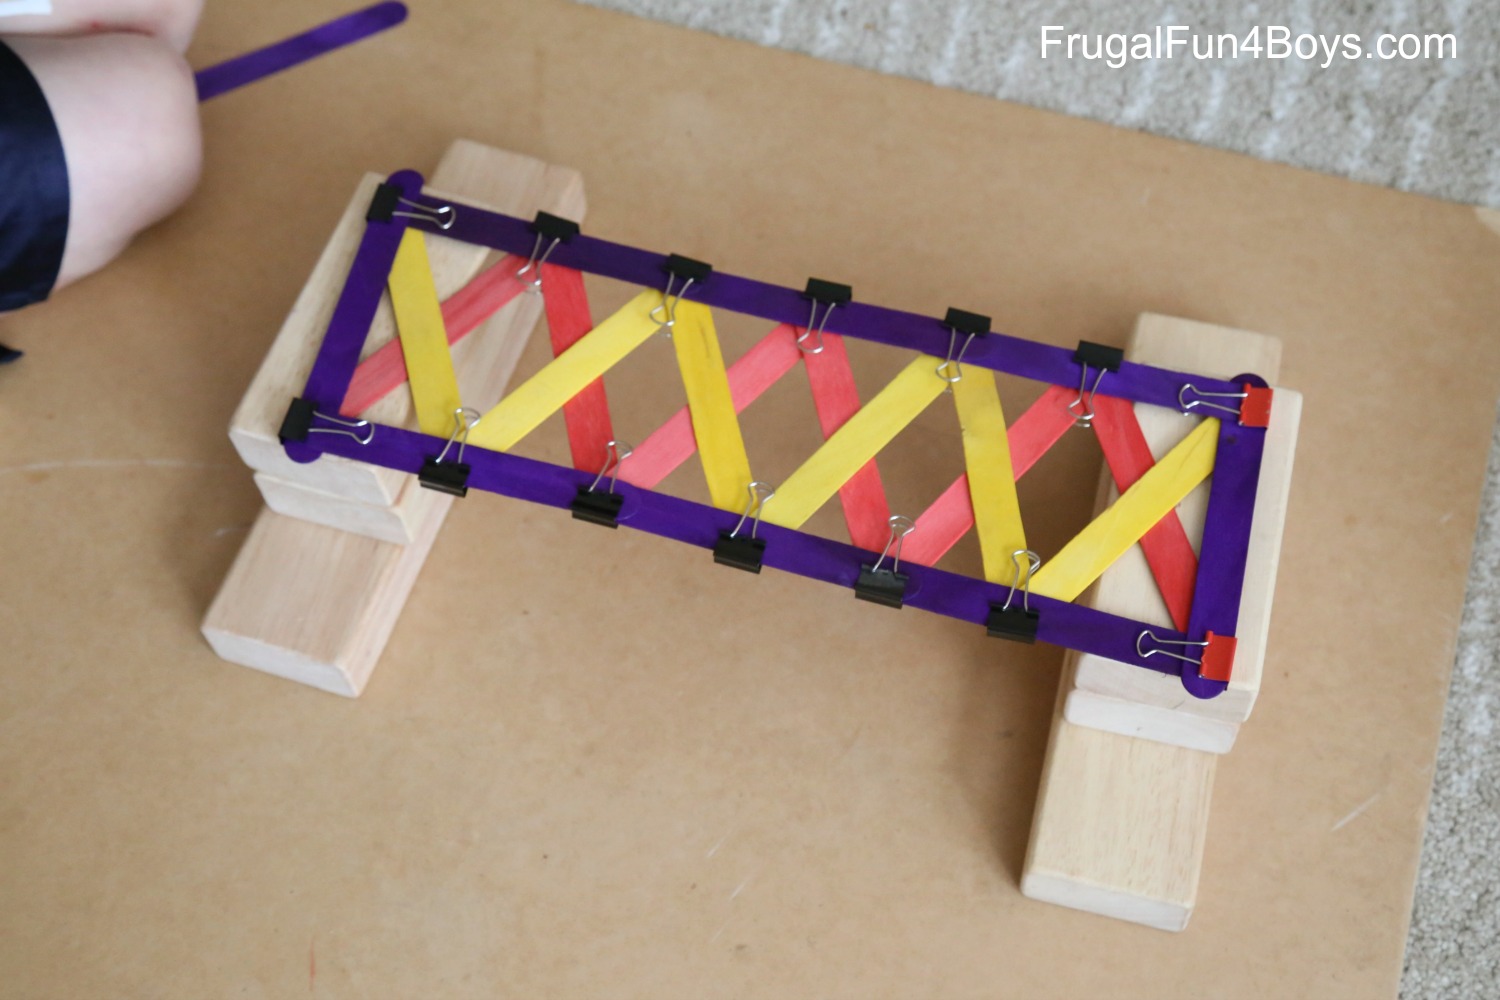 Five Engineering Challenges with Clothespins, Binder Clips, and Craft Sticks